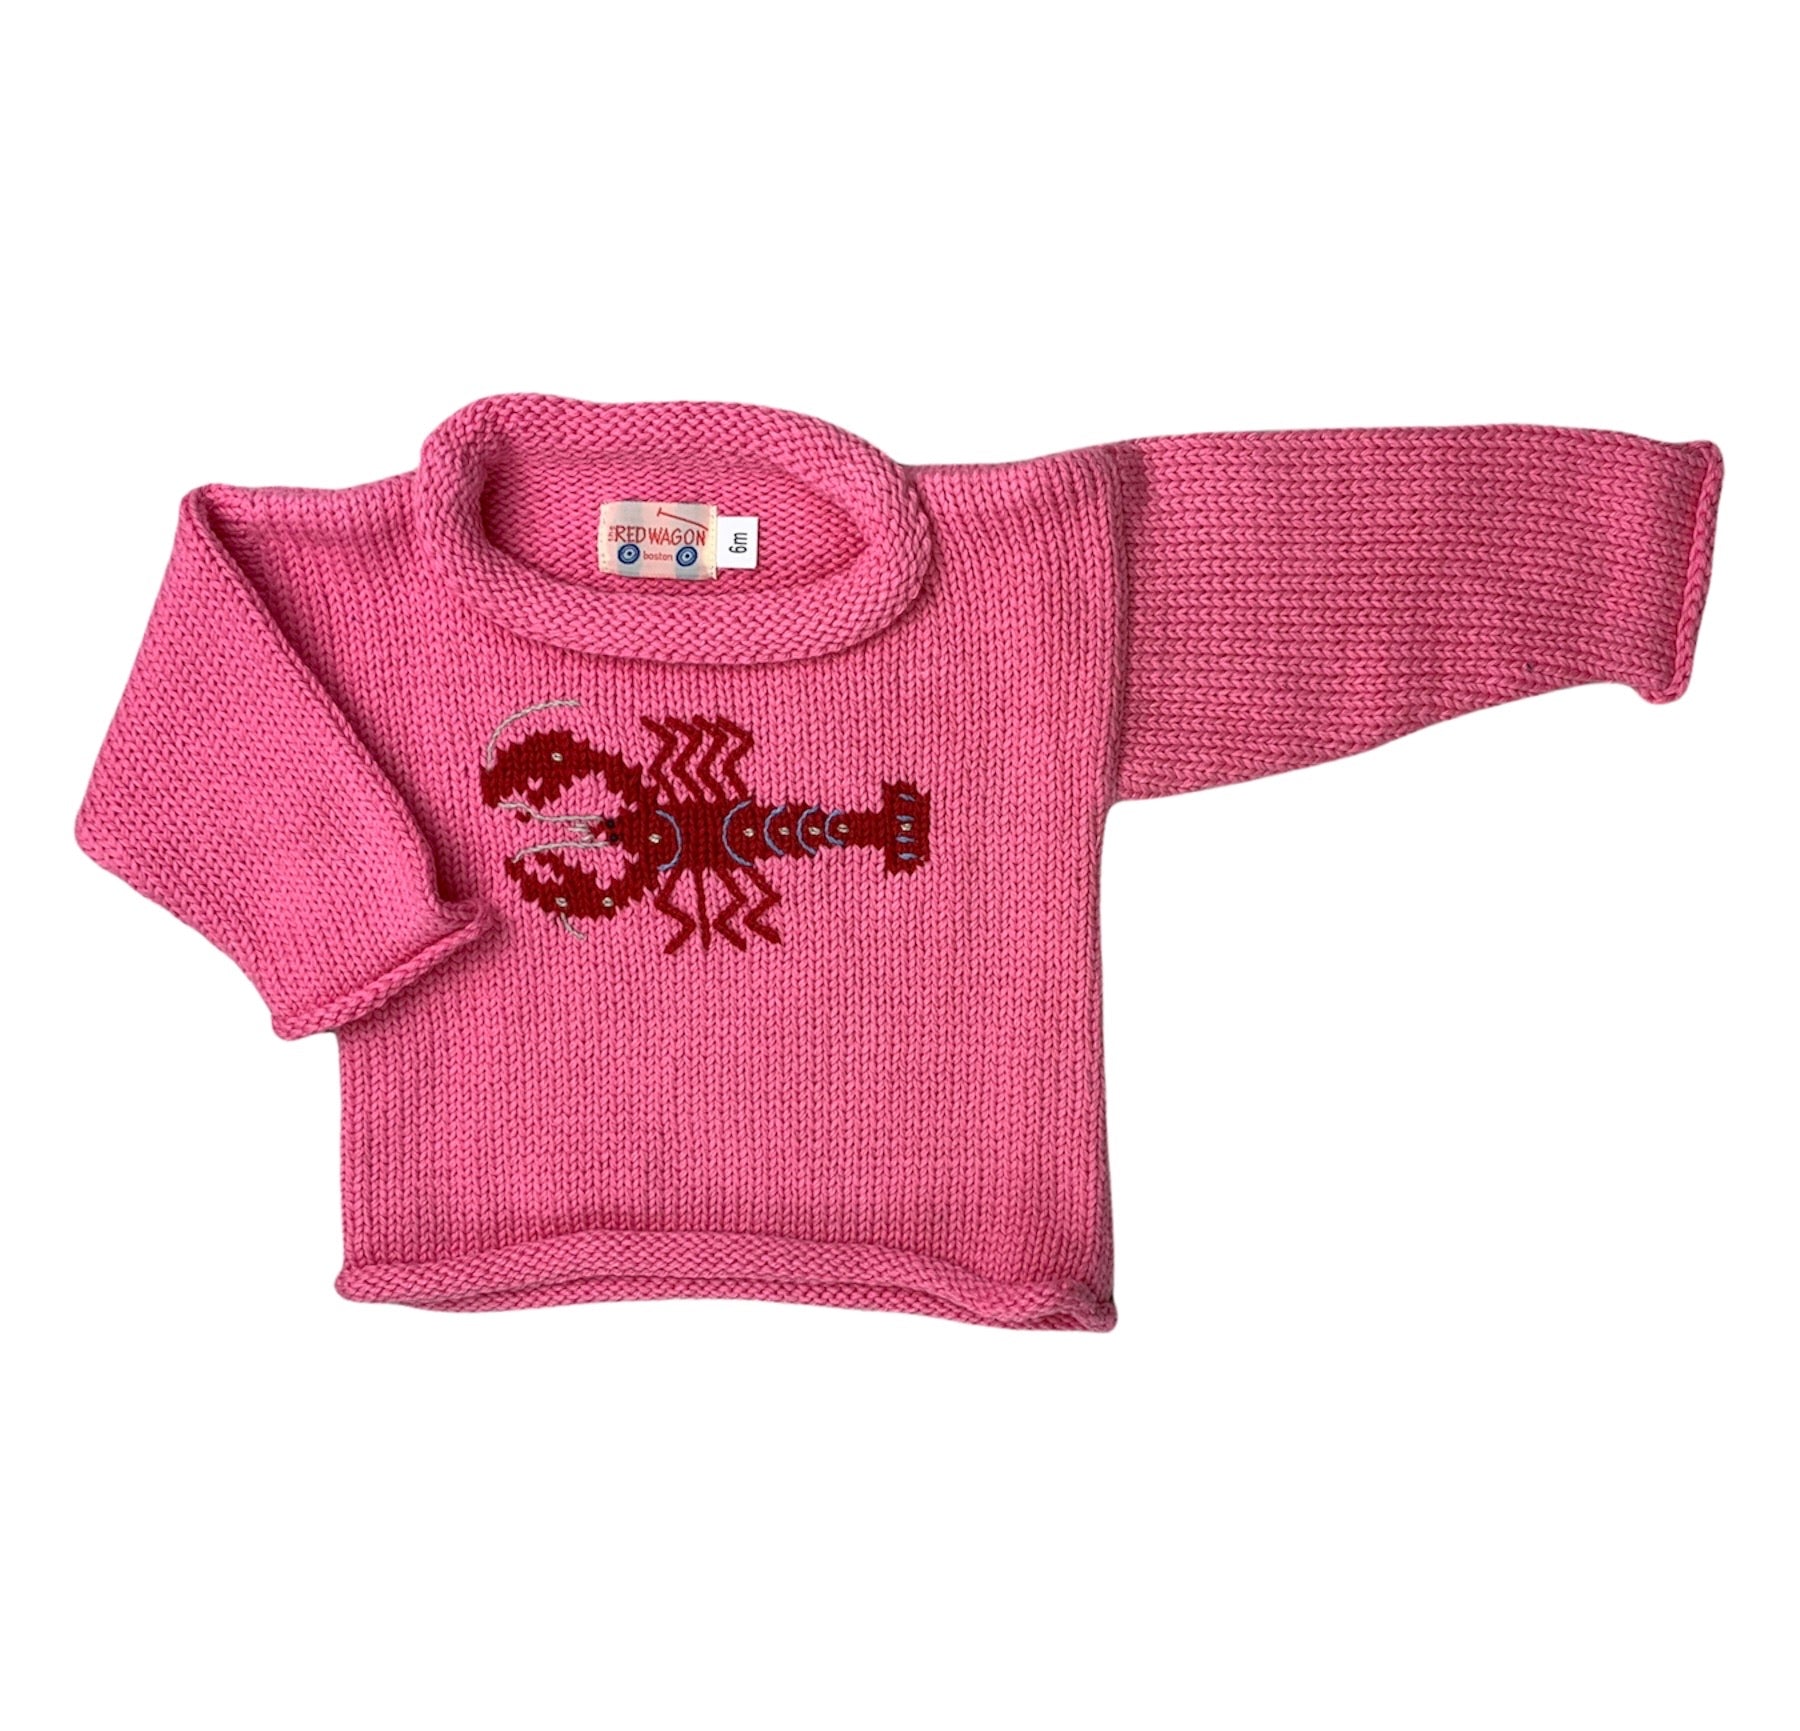 bright pink sweater with red lobster design in center